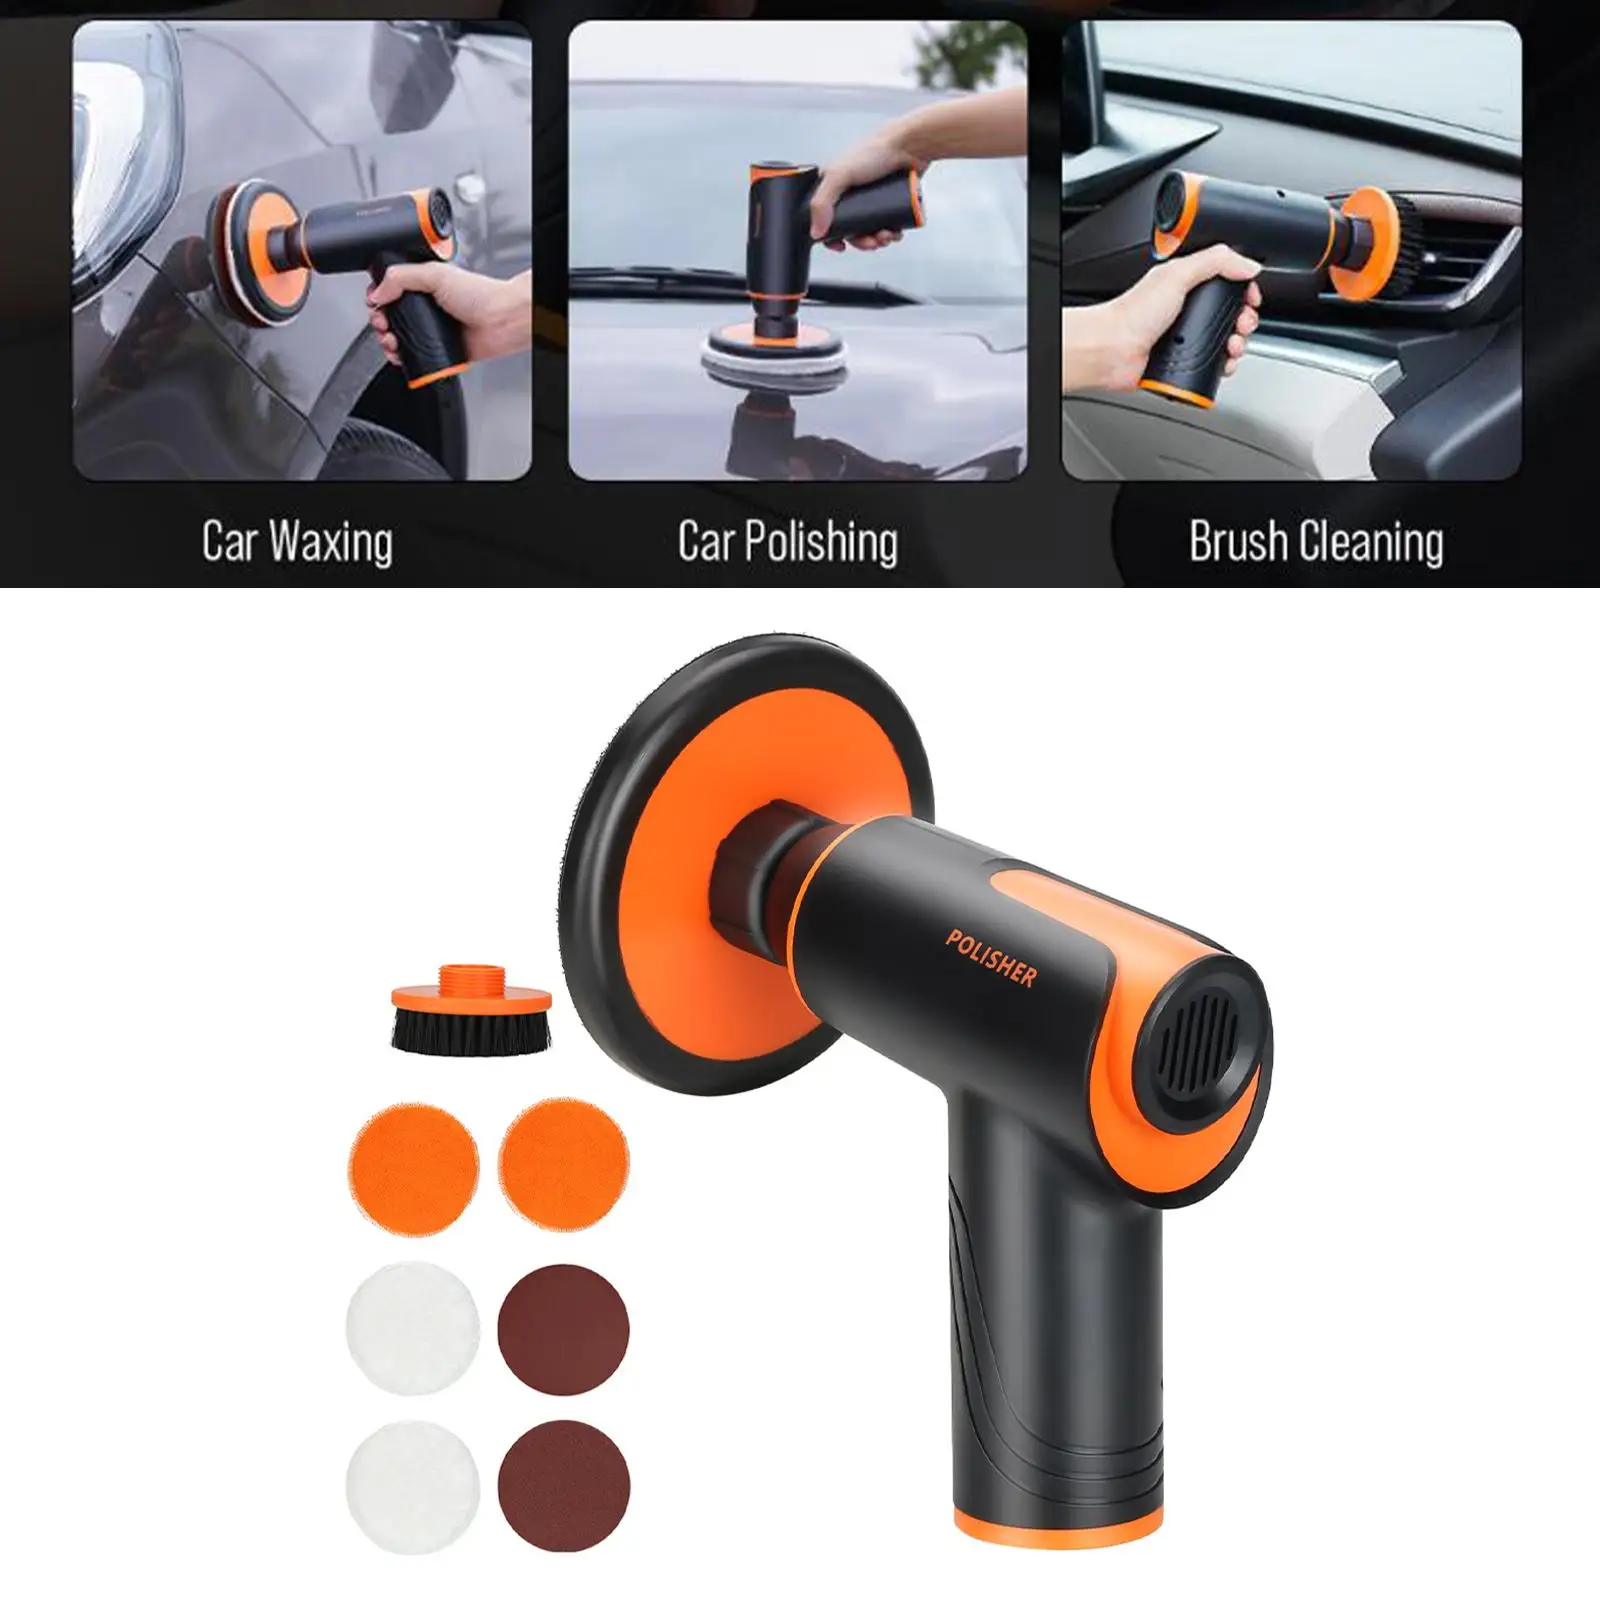 Car Buffer Polisher Fast Charging for Automobile Detail Processing